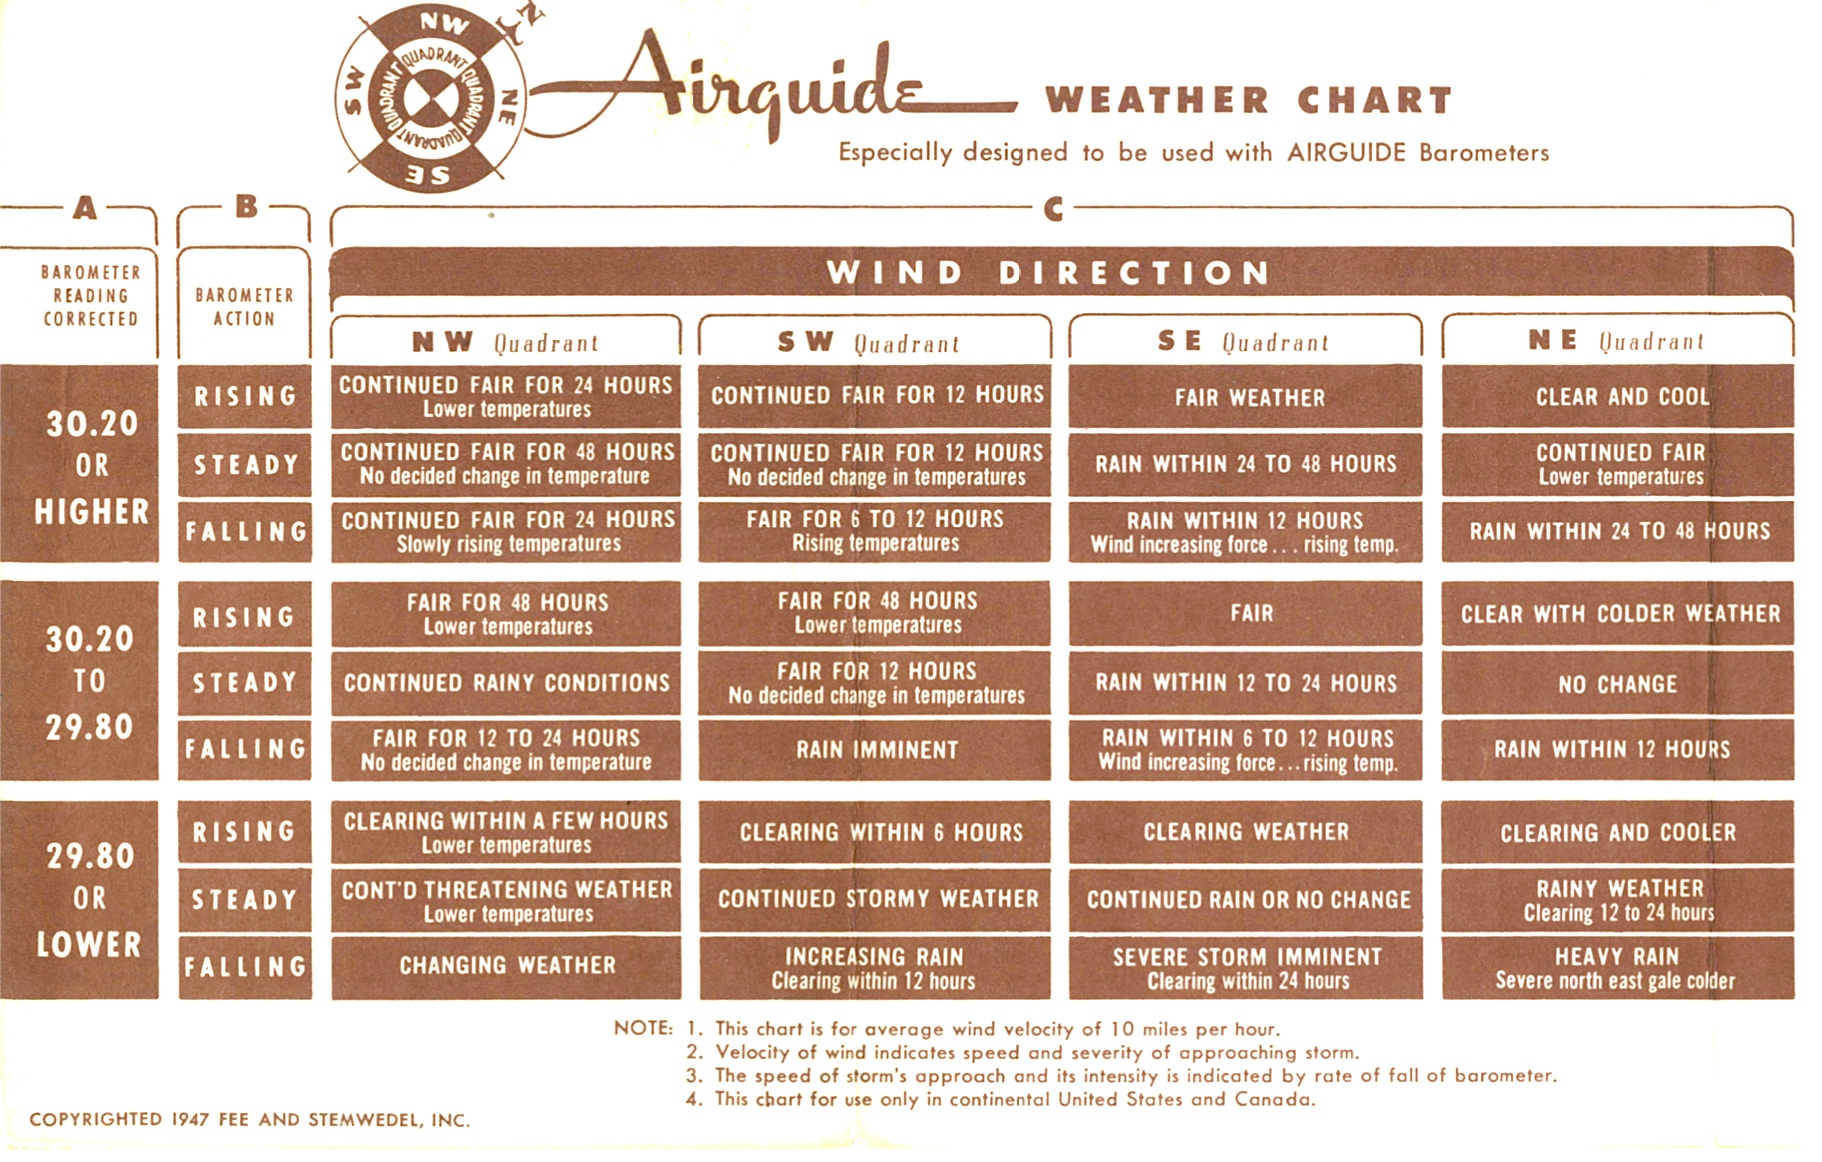 Airguide Weather chart